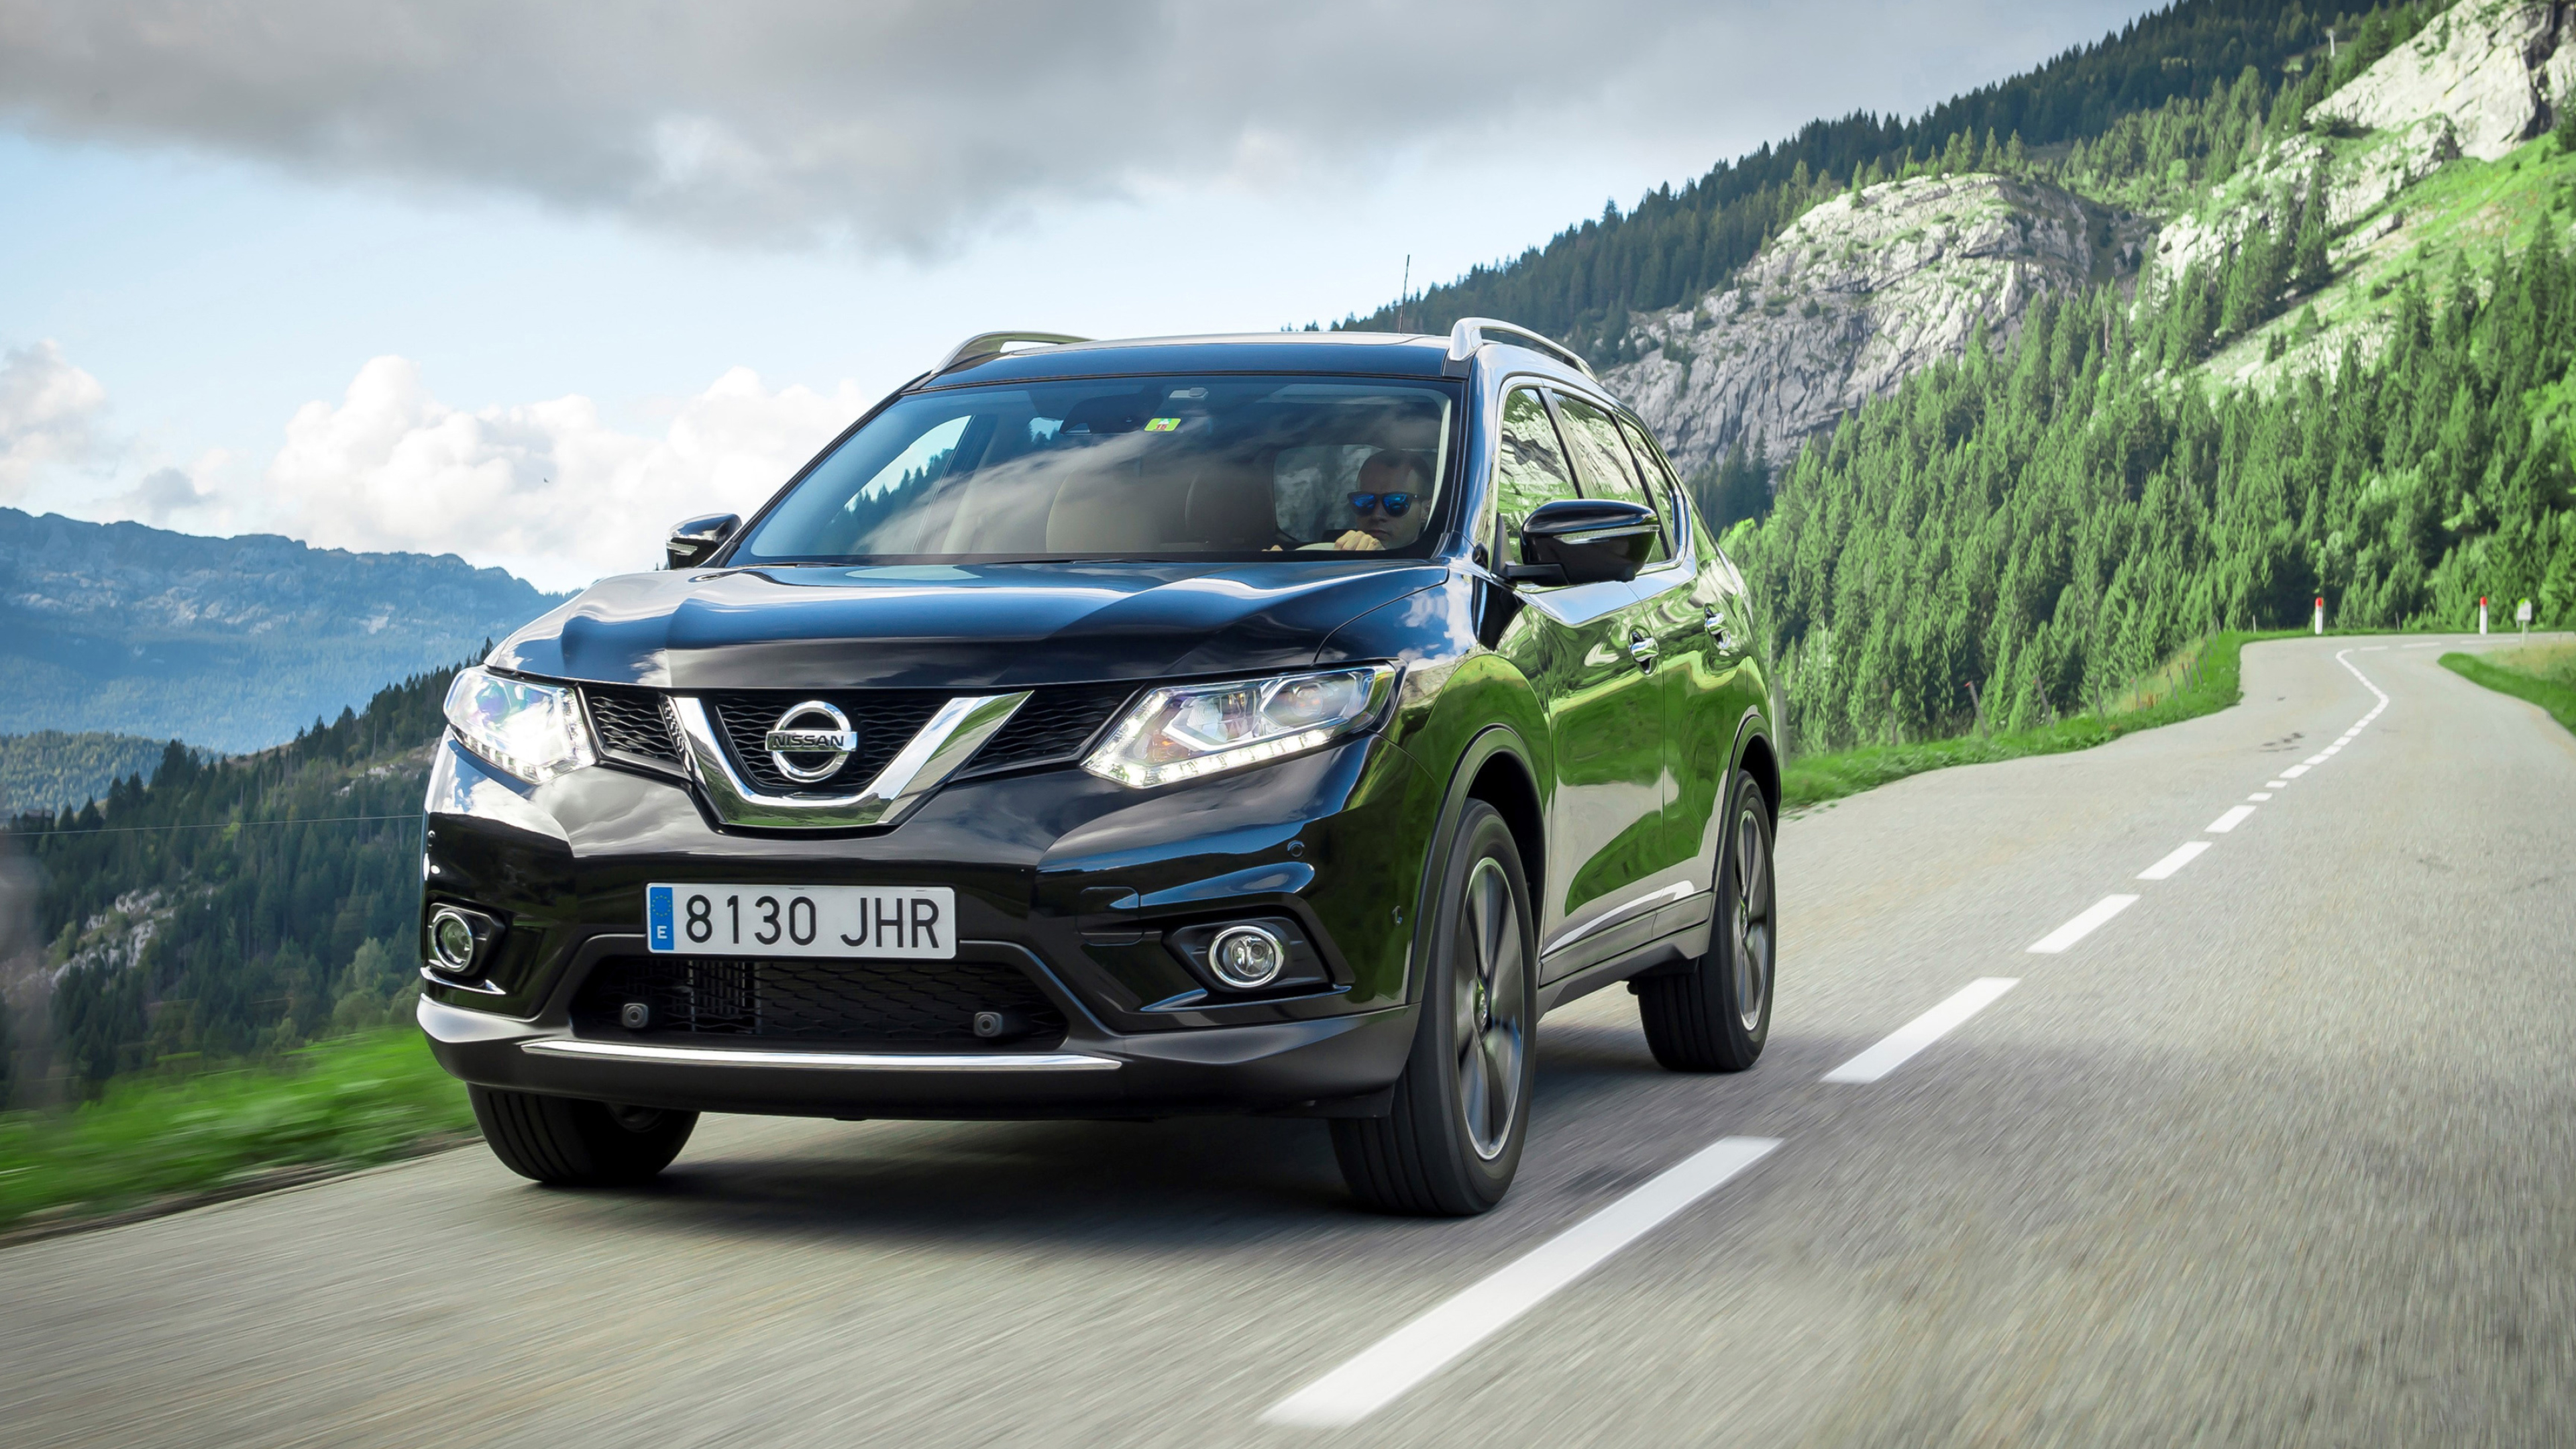 Nissan Rogue, Cars desktop wallpapers, Ultra HD quality, Show off your style, 3840x2160 4K Desktop